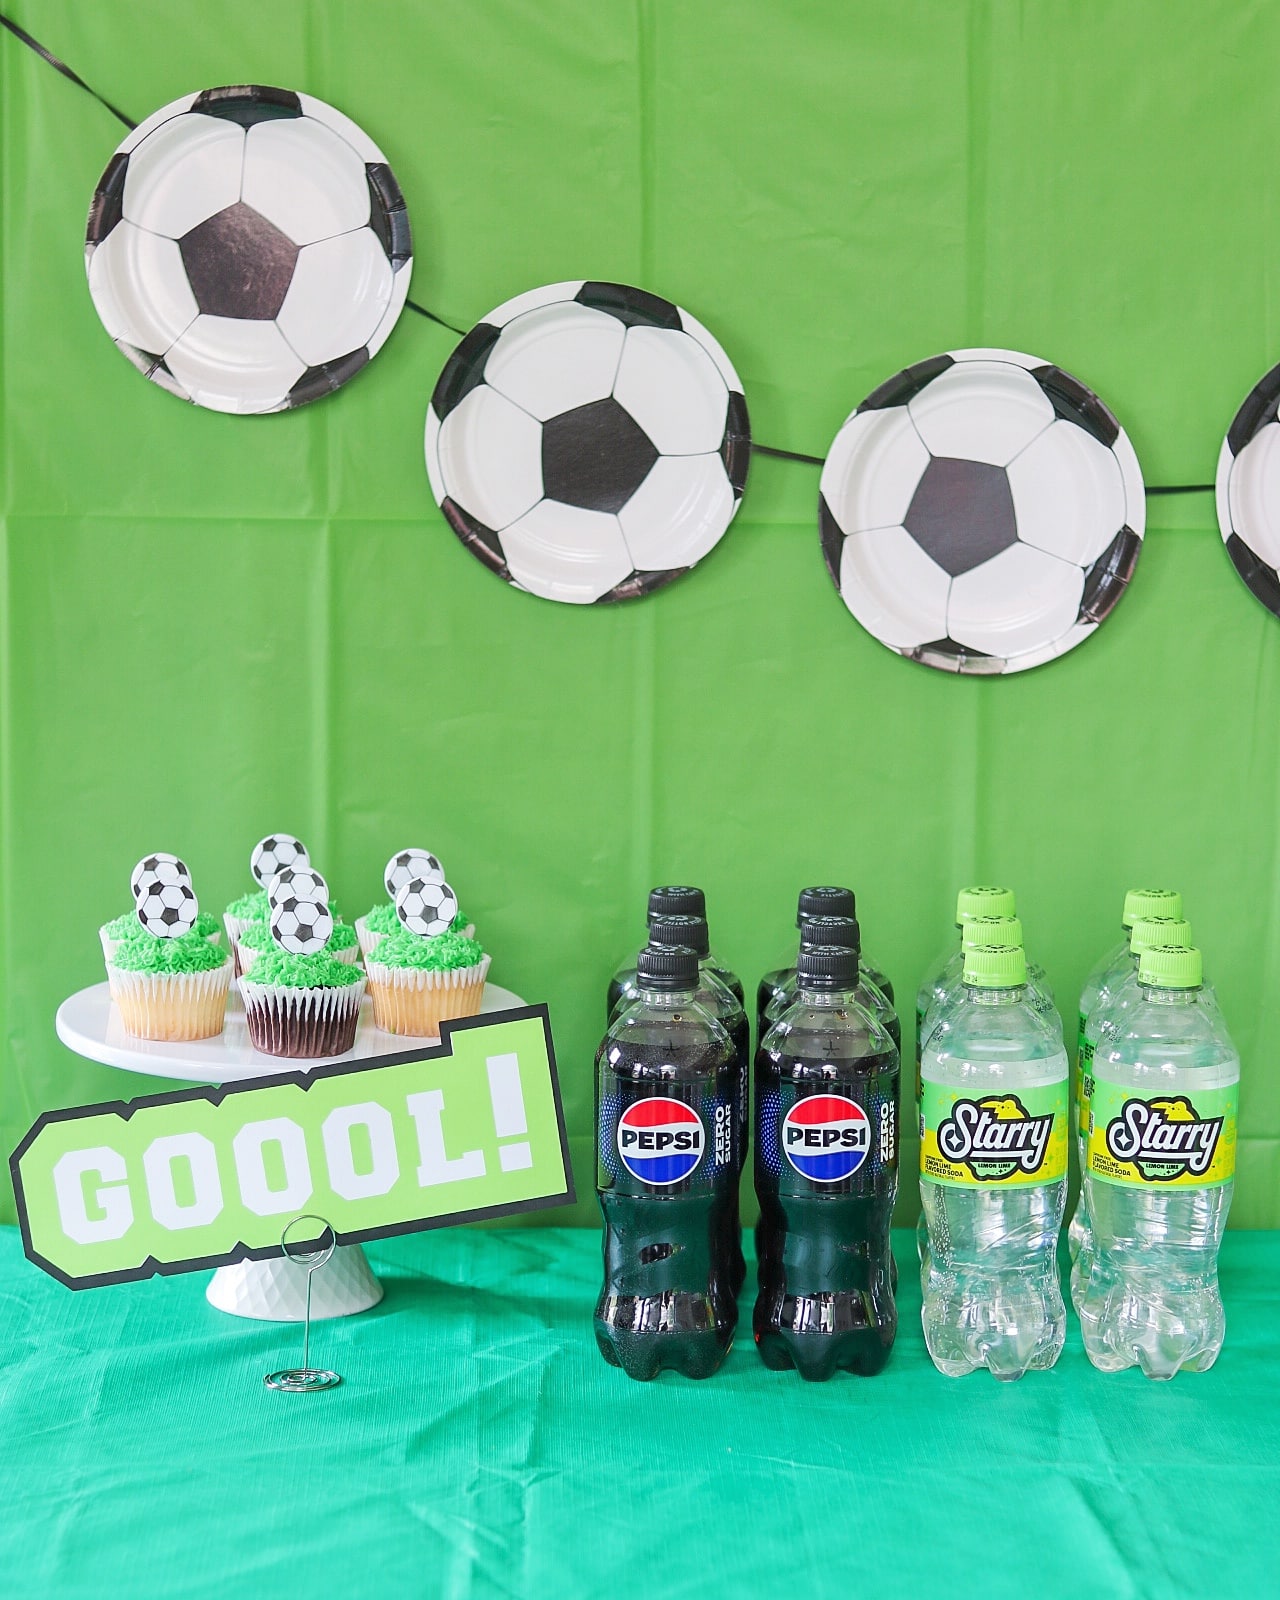 soccer birthday party ideas: DIY soccer party decorations